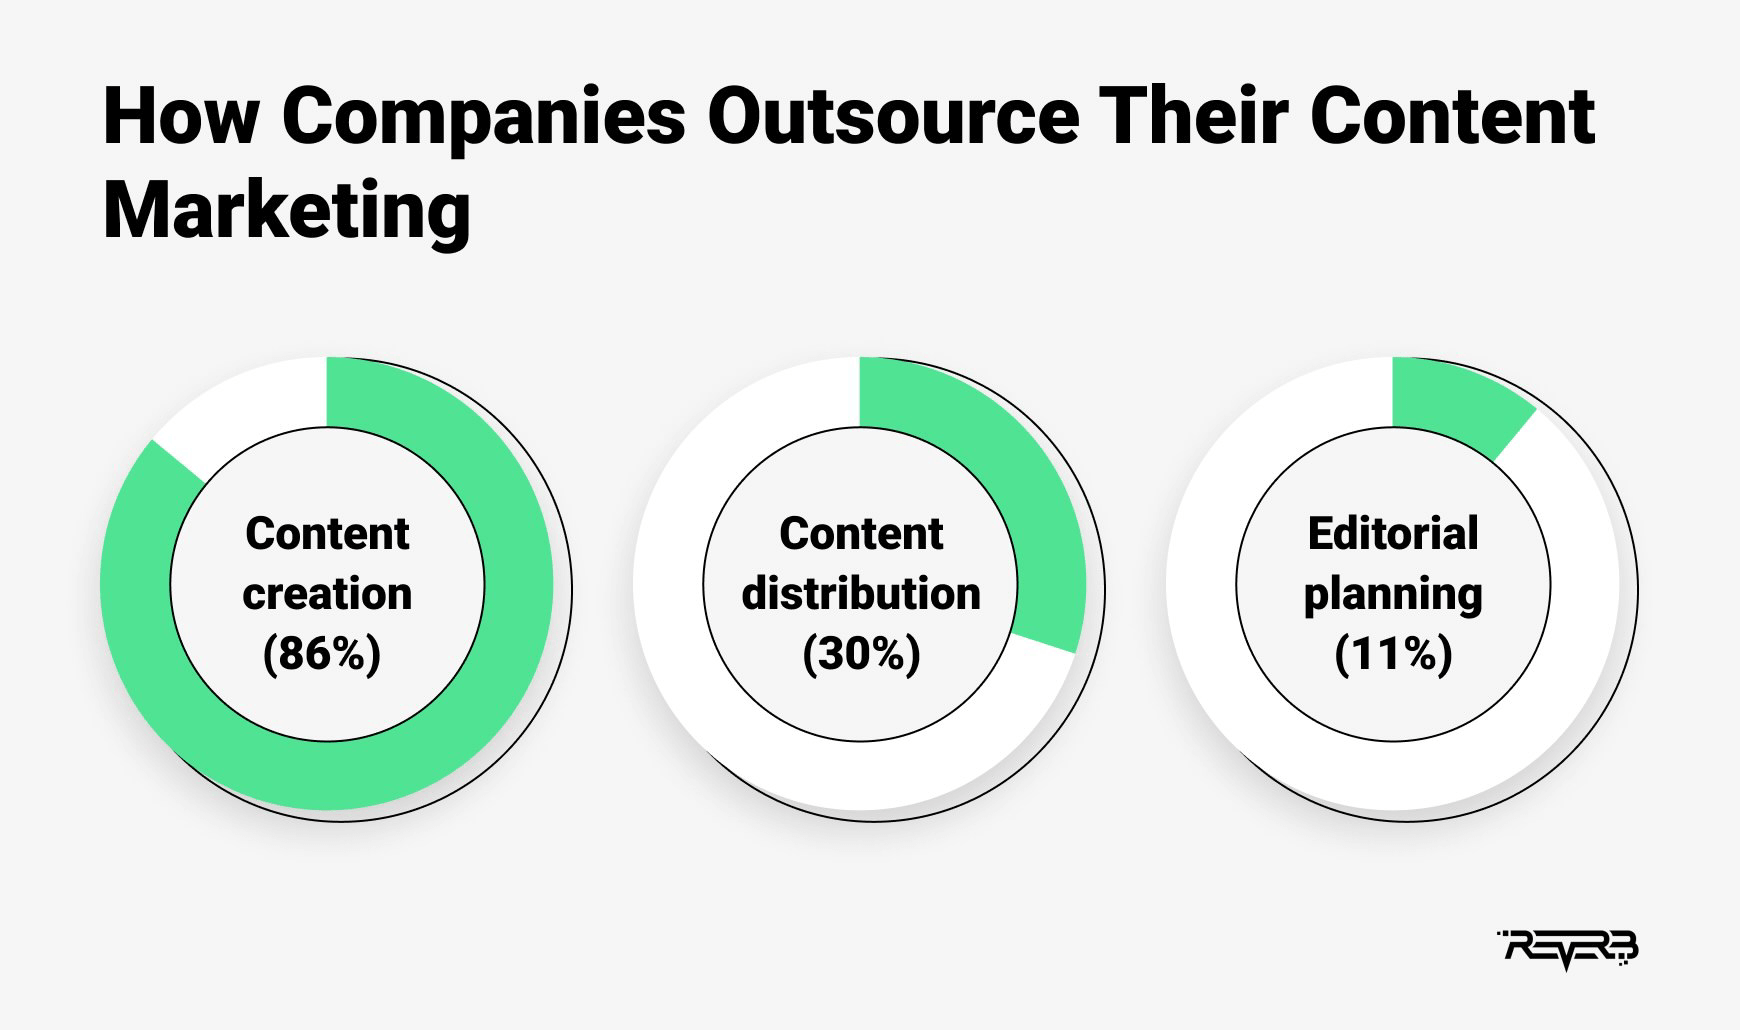 outsourcing content marketing statistics